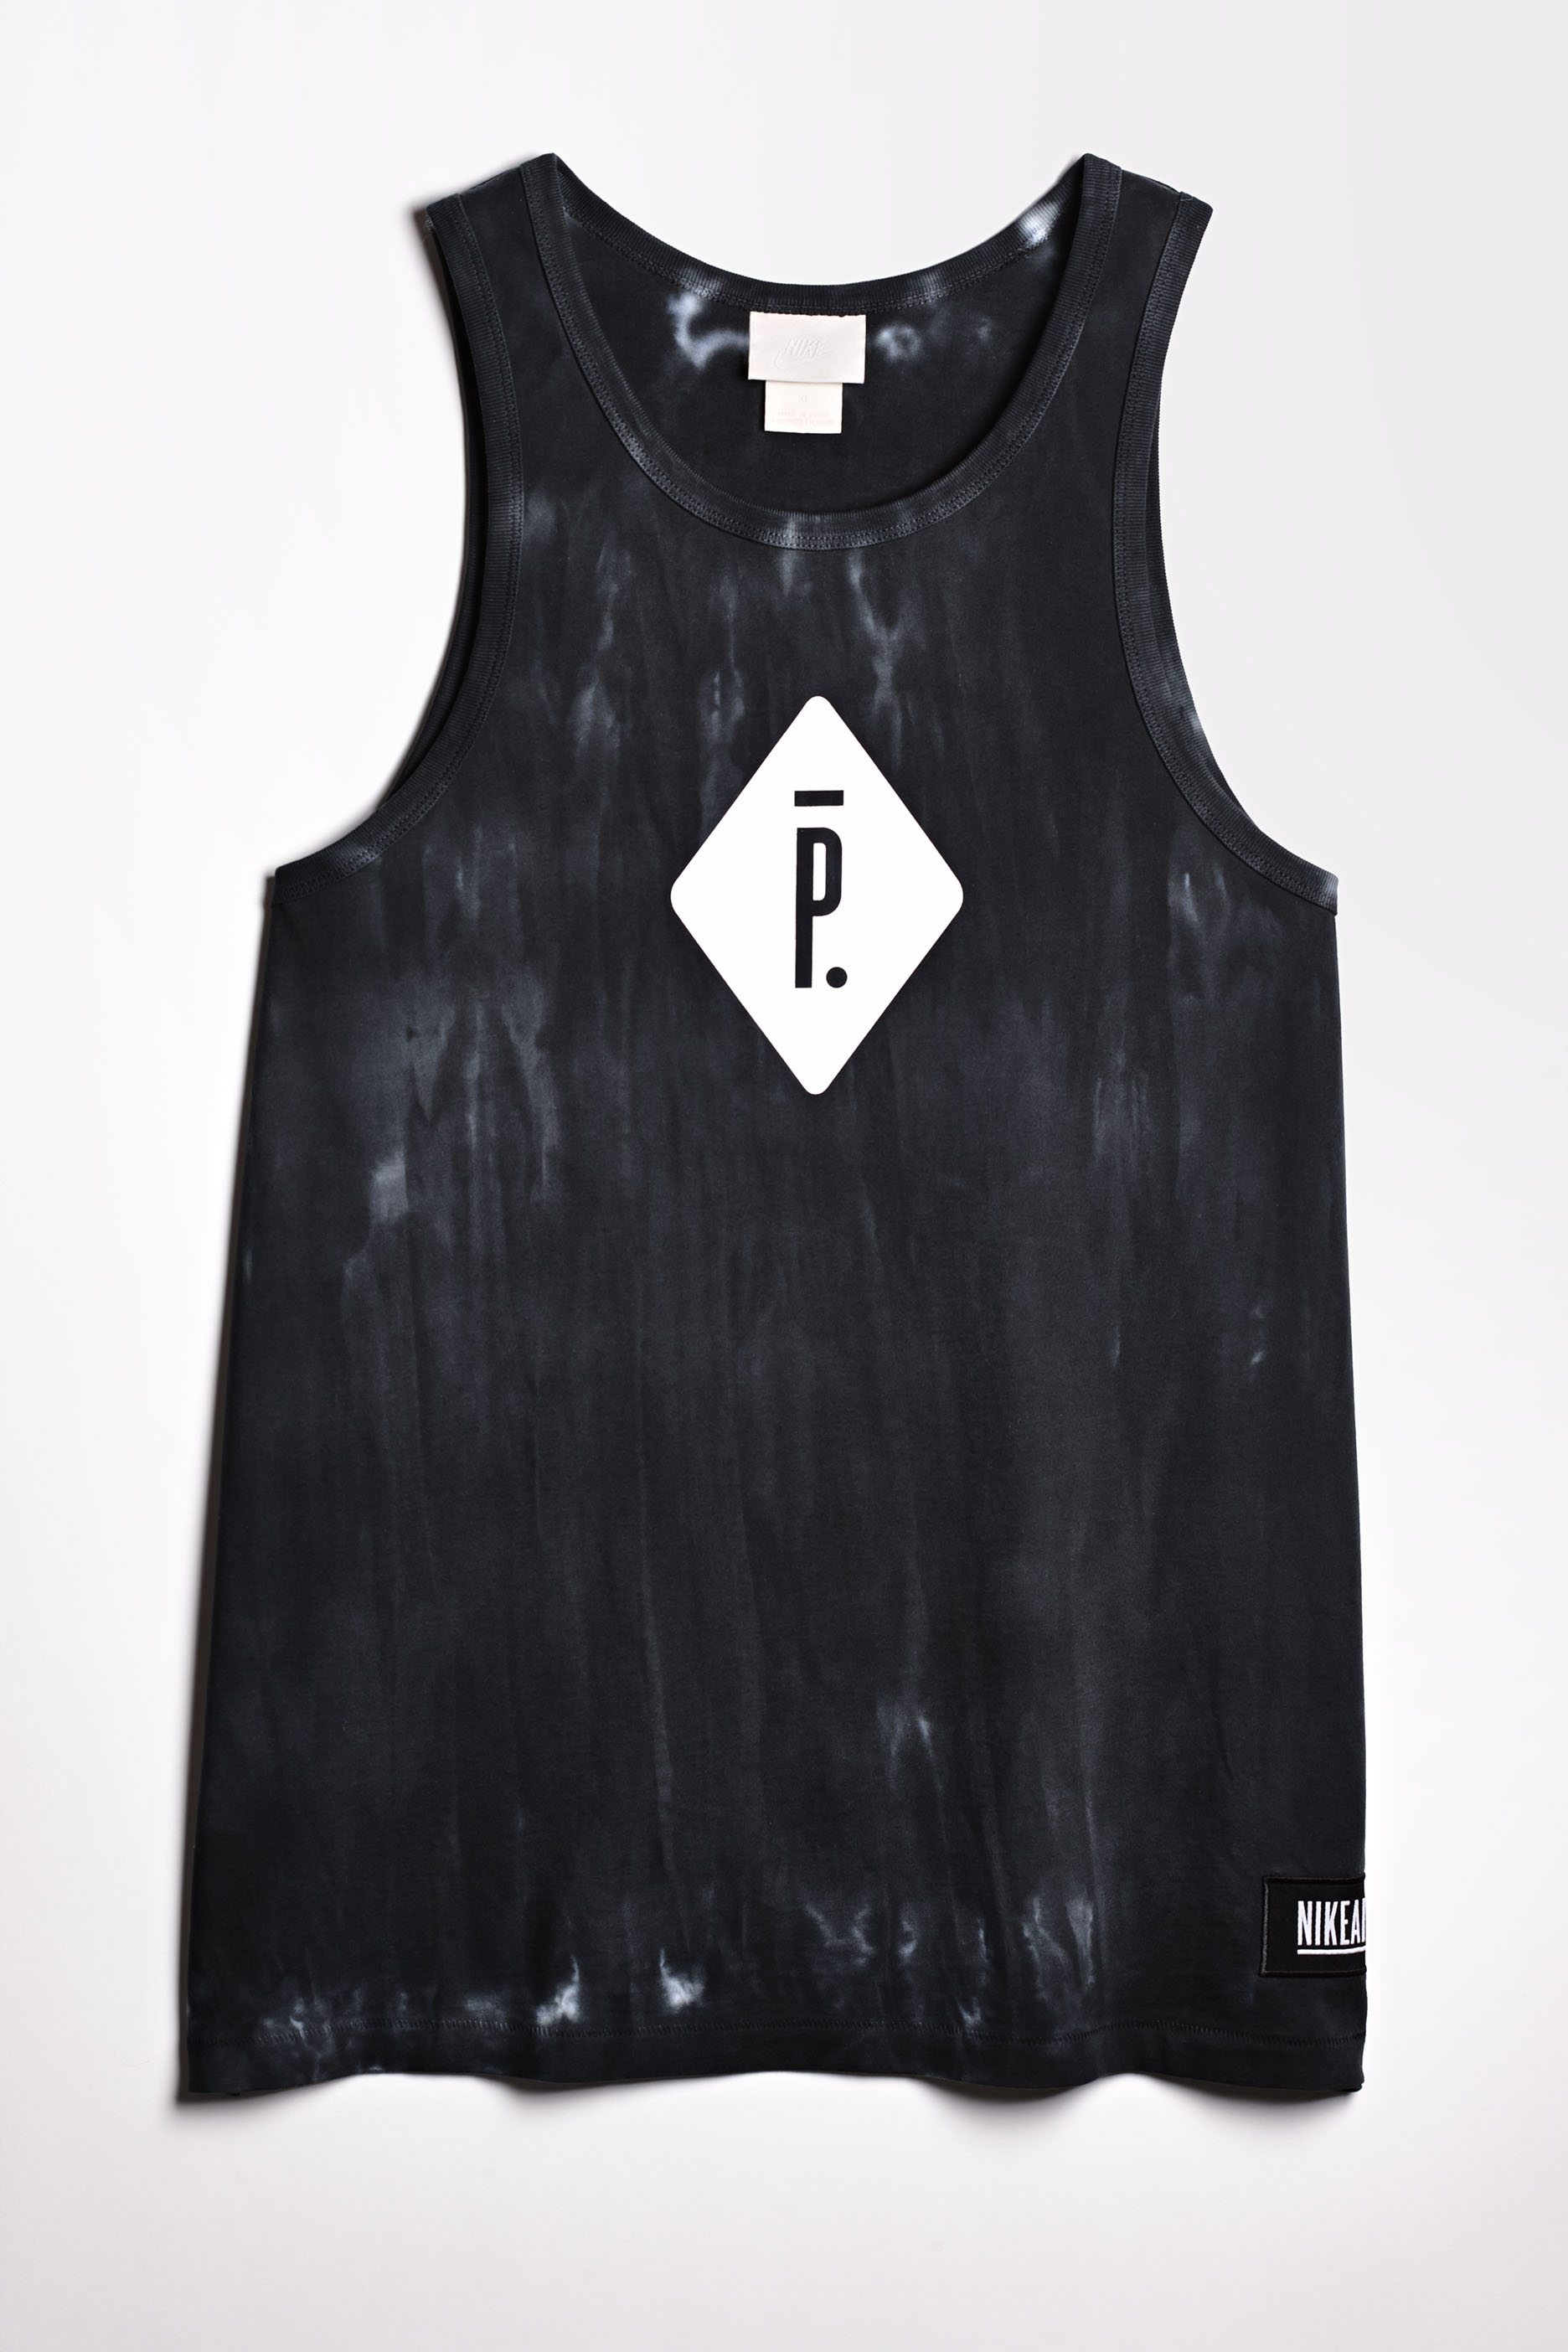 1397590319_nike_pigalle_tank_blk